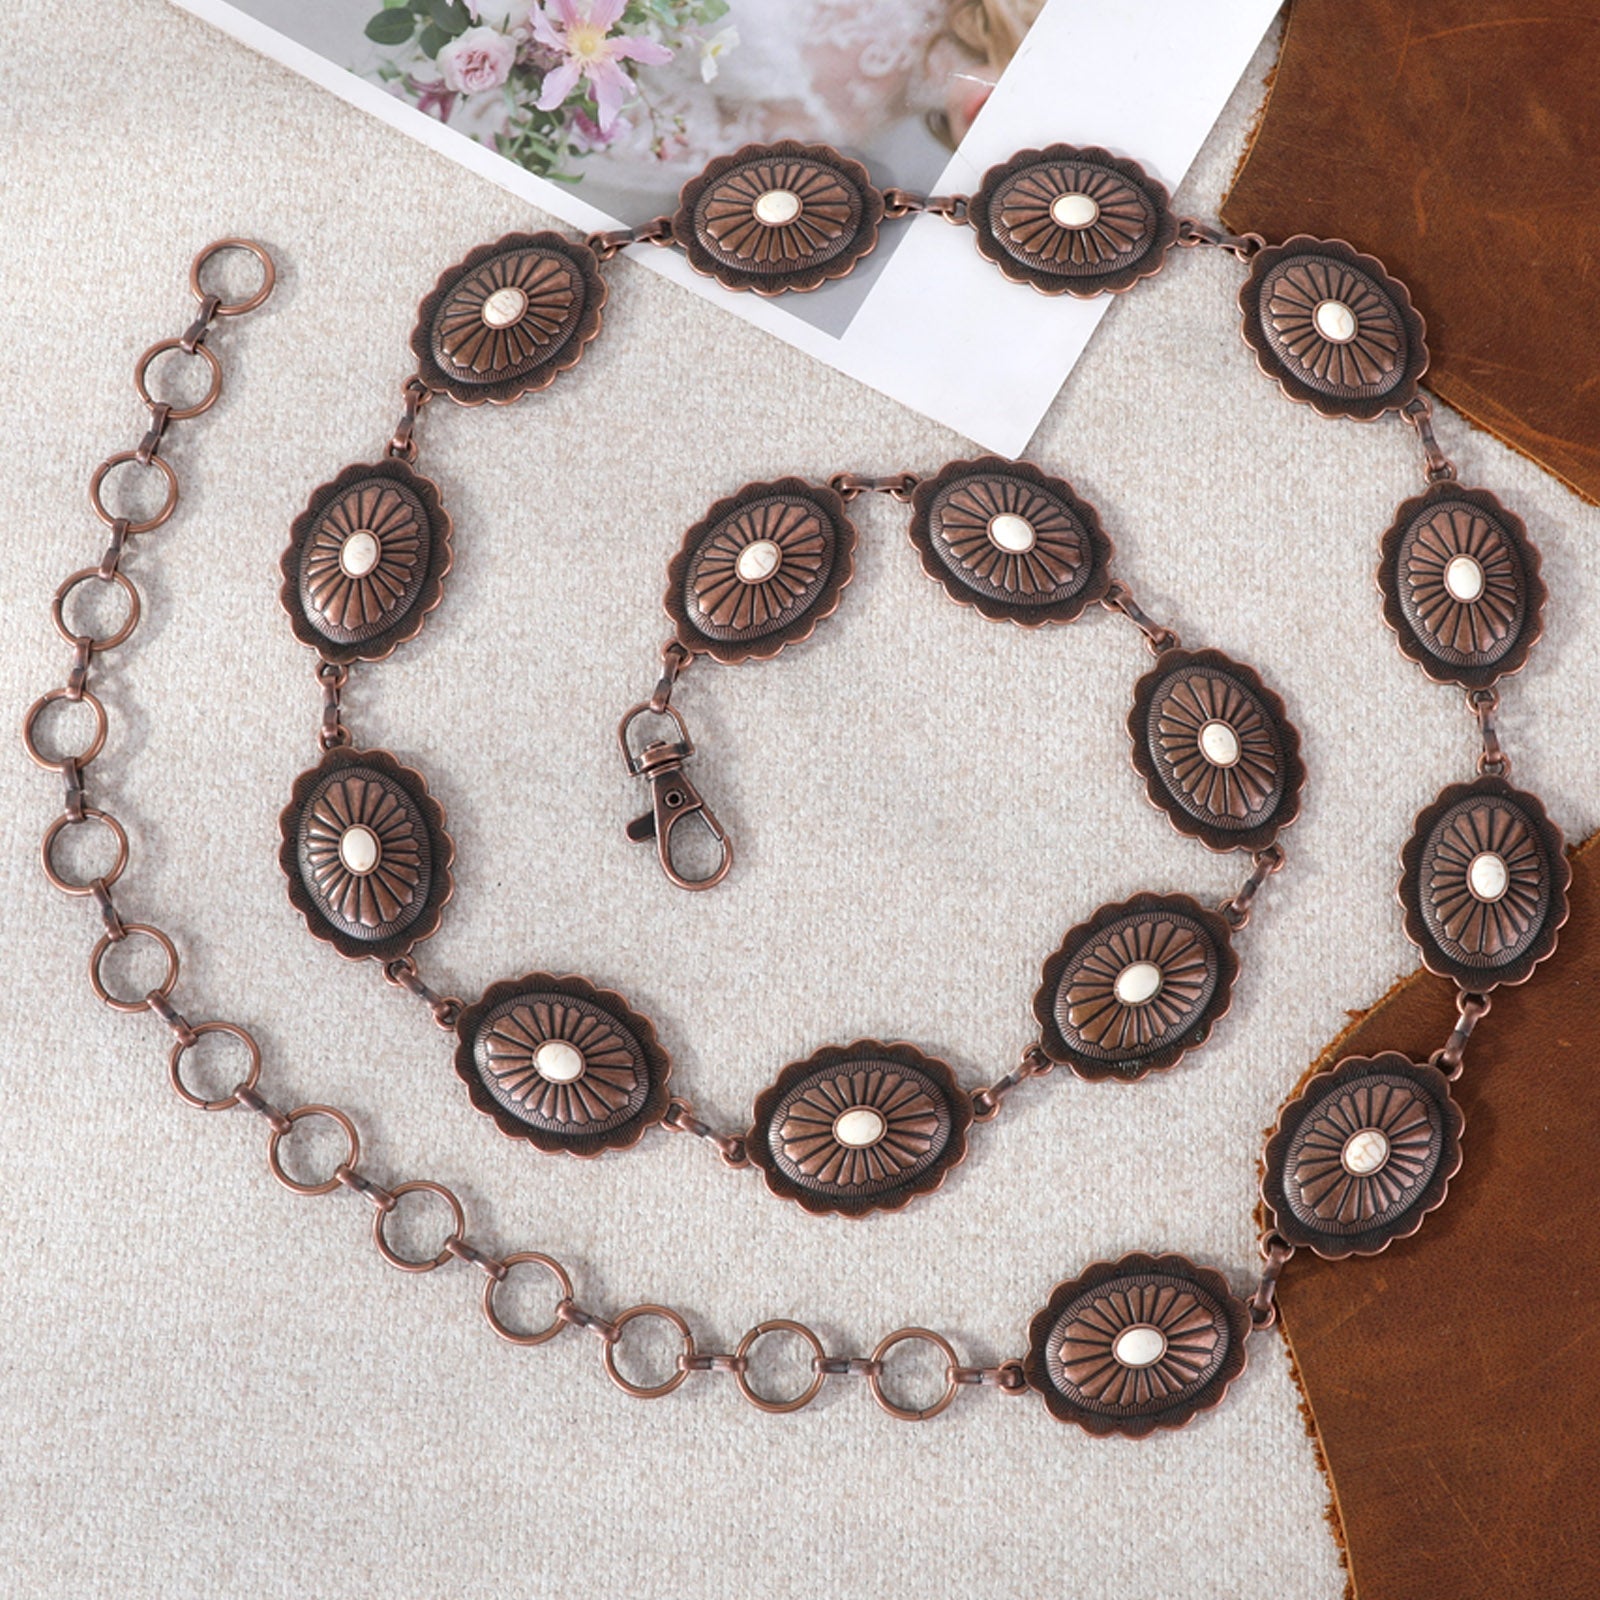 Rustic Couture Etched Silver/Bronze Oval Stone Centered Concho Link Chain Belt - Cowgirl Wear